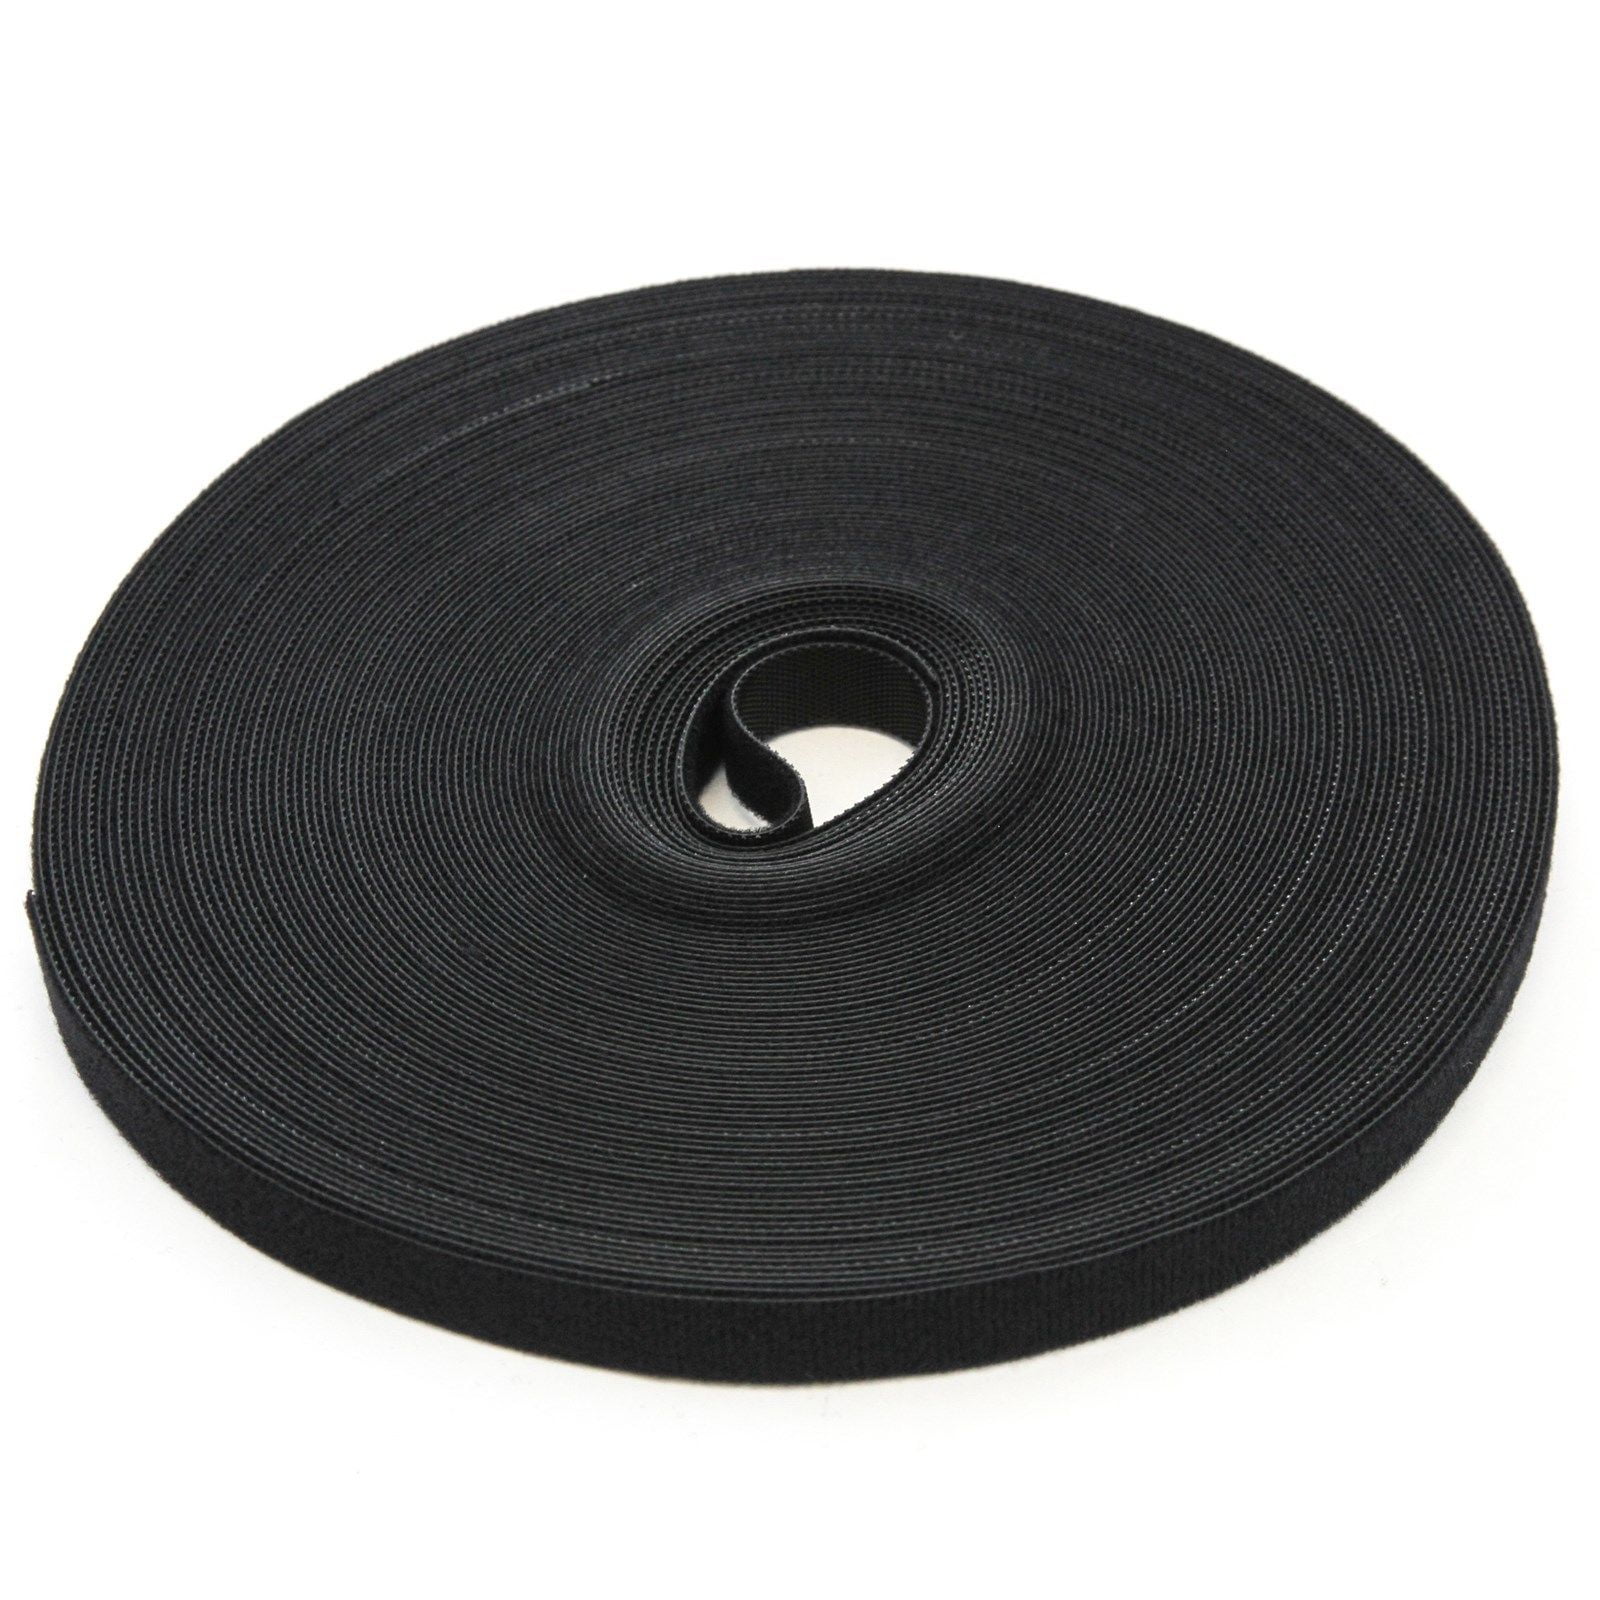 1/2" Wide Hook and Loop Reusable Cable Ties Wraps & Straps 5ft Roll 